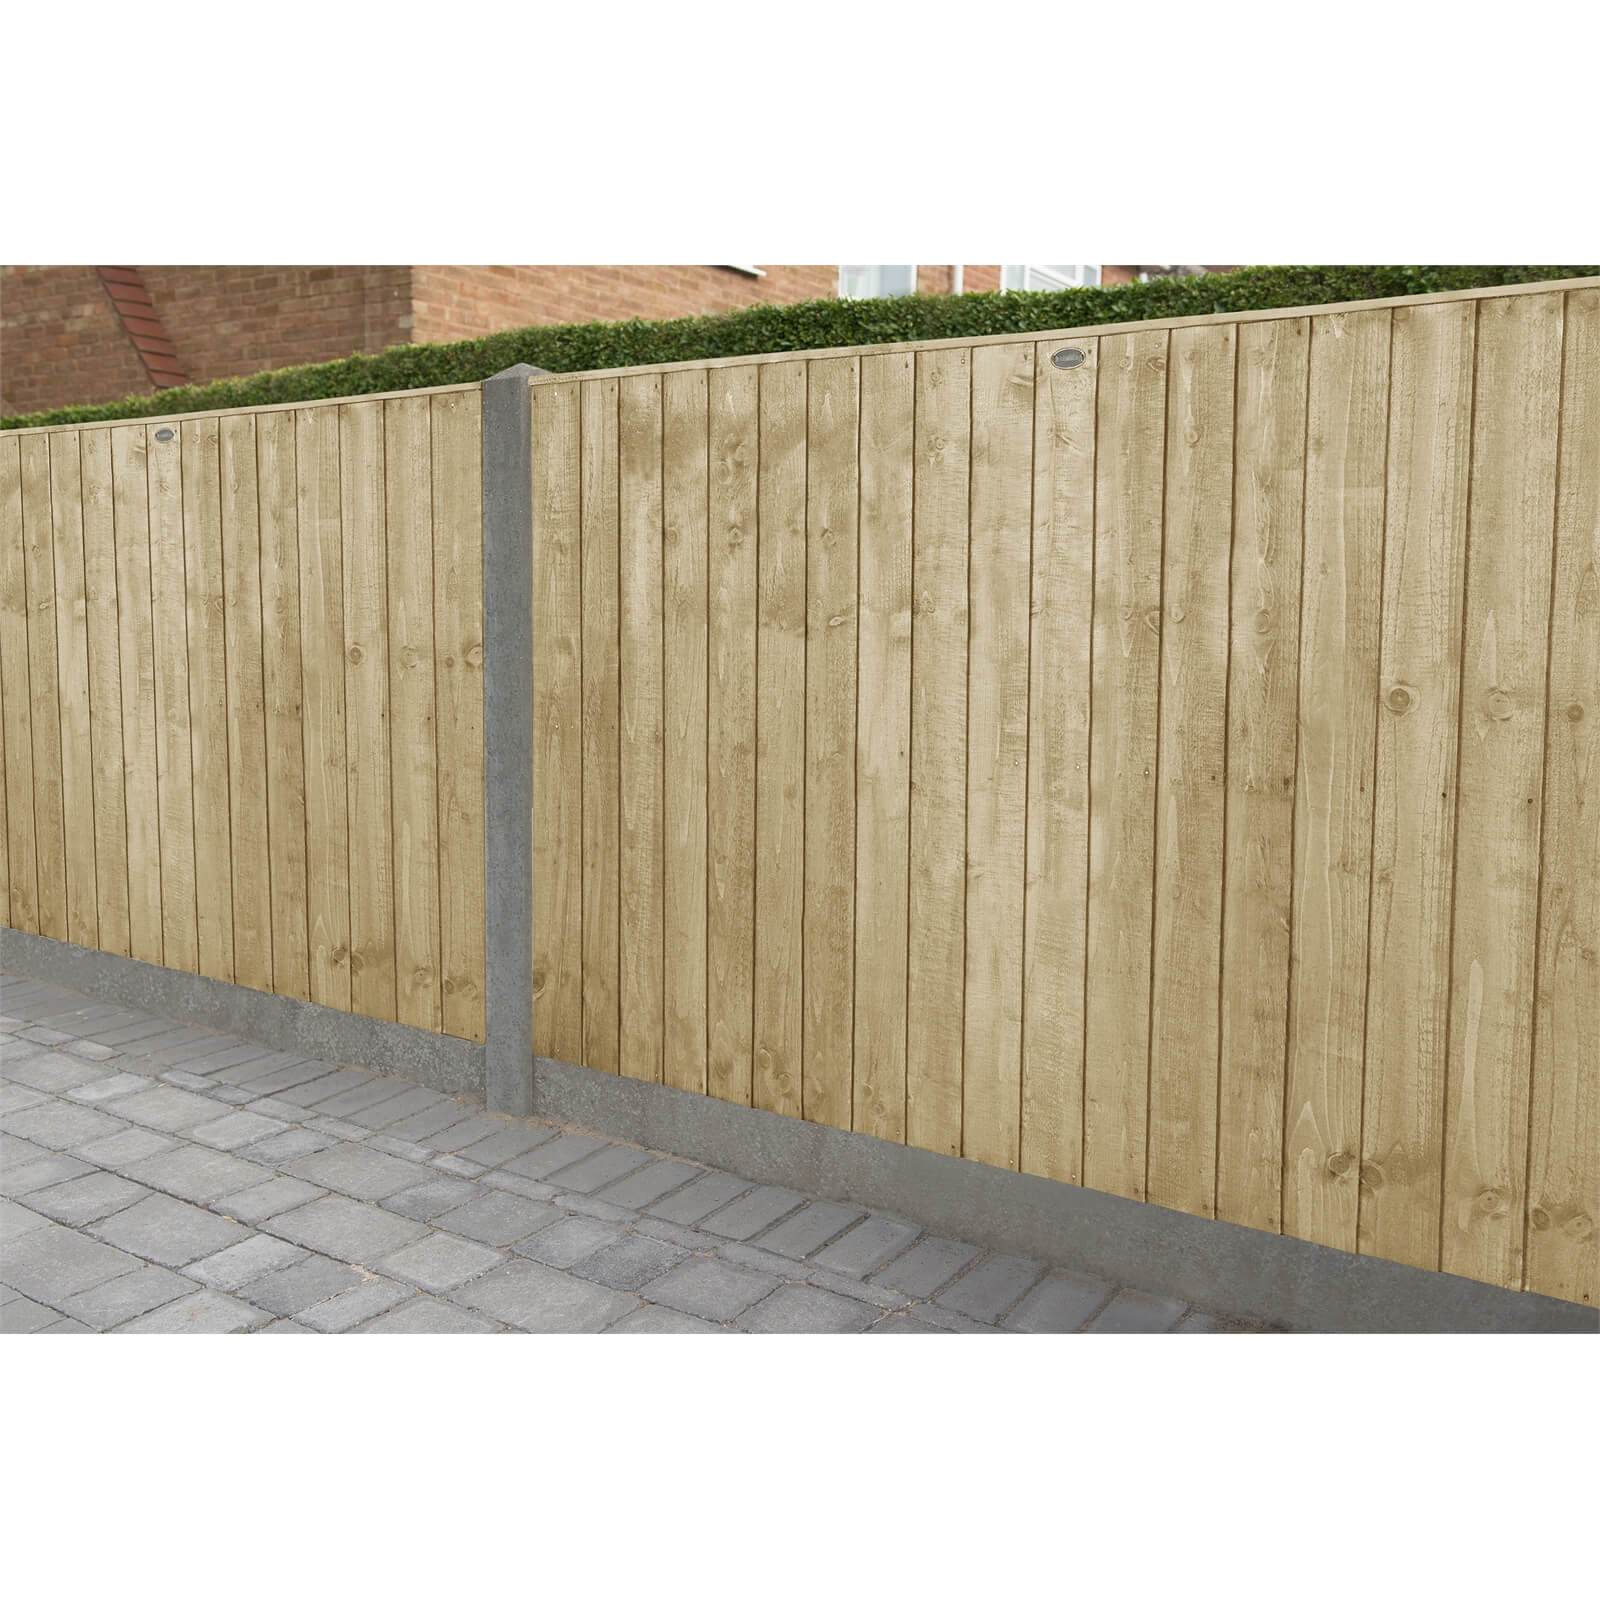 6ft x 4ft (1.83m x 1.23m) Pressure Treated Featheredge Fence Panel - Pack of 20